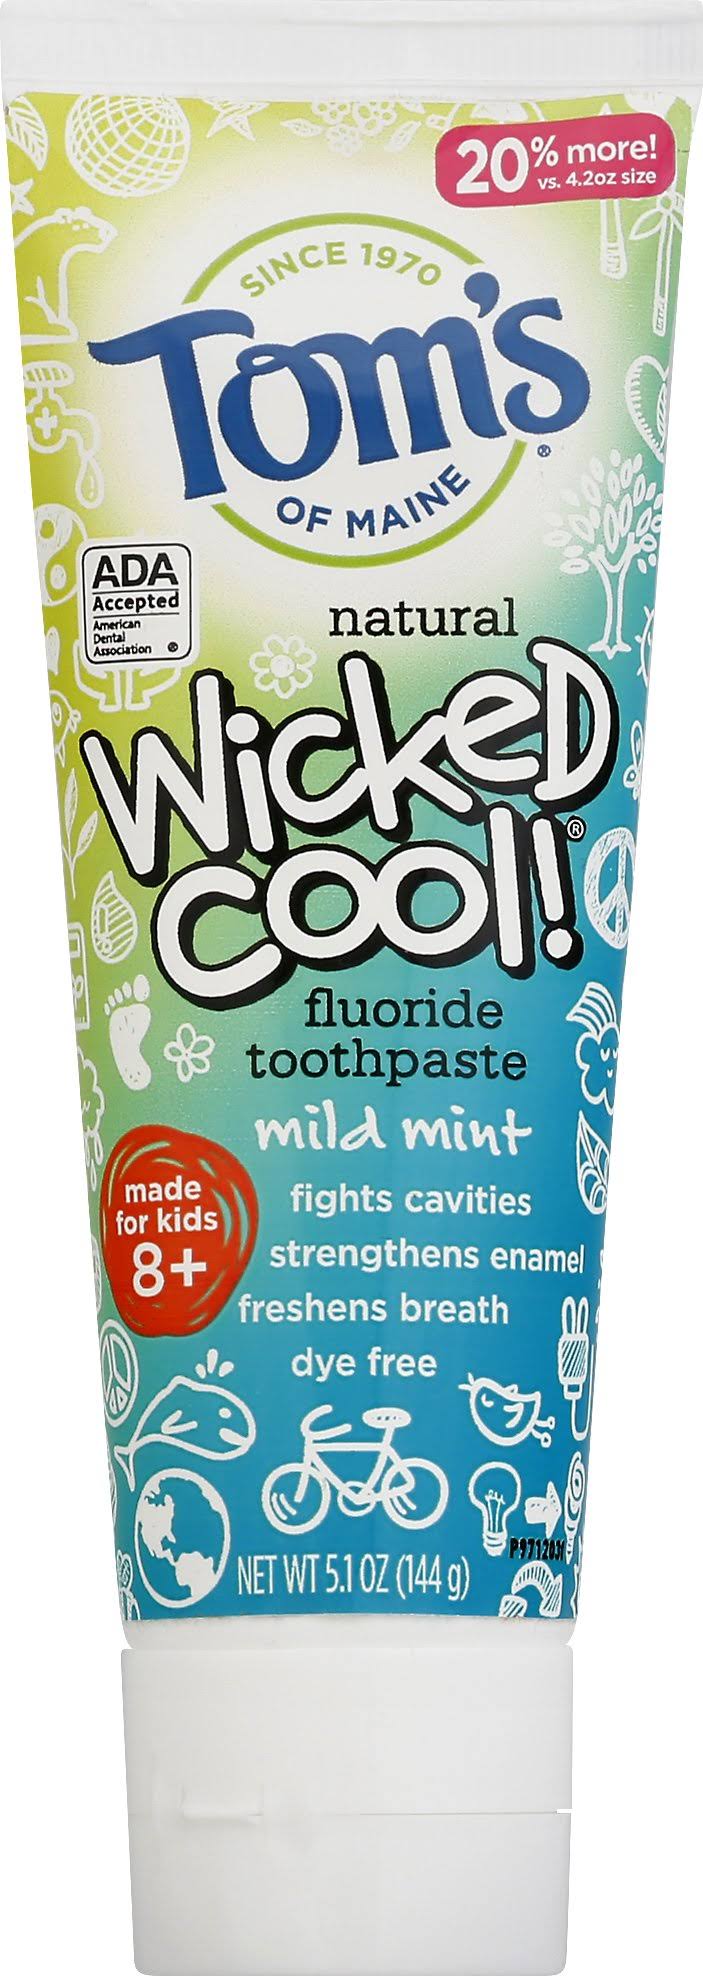 Tom's of Maine Wicked Cool Fluoride Toothpaste Mild Mint -- 5.1 oz